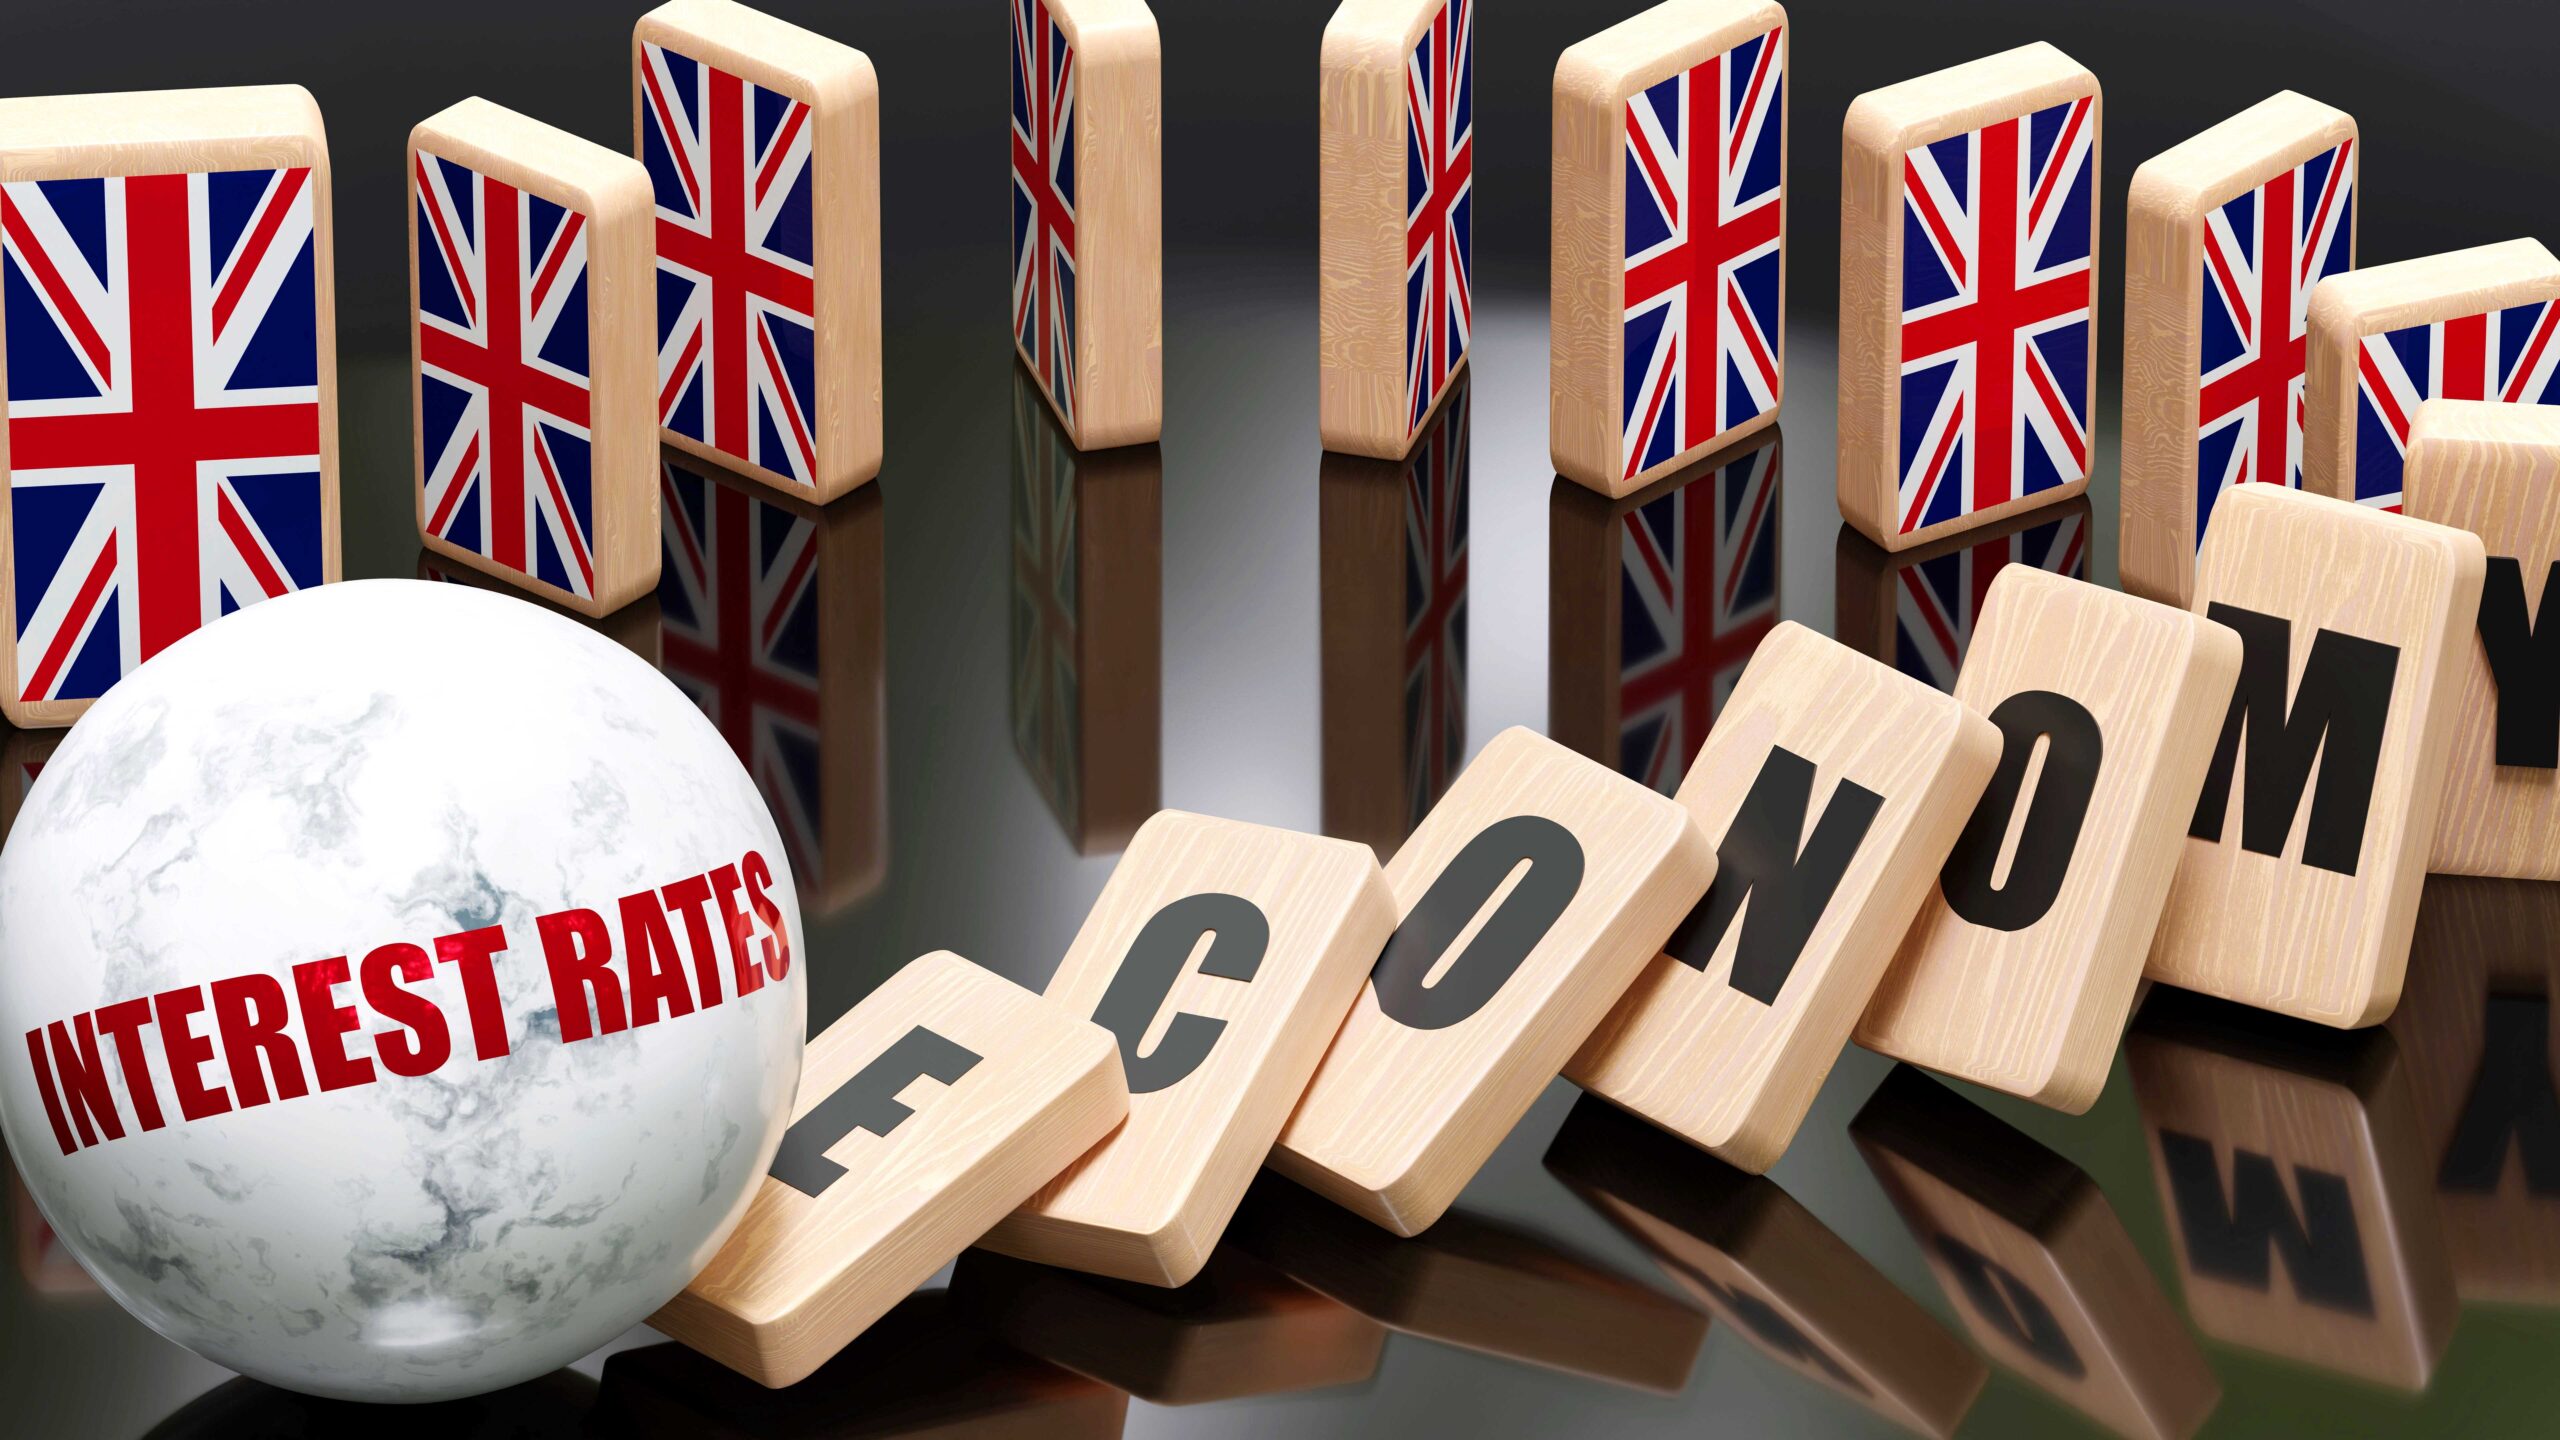 Graphic showing dominoes with Union Jack on them standing up, and dominoes spelling out the word 'economy' falling down, alongside a spherical object with 'interest rates' printed on the side - representing interest rates negatively affecting the UK economy